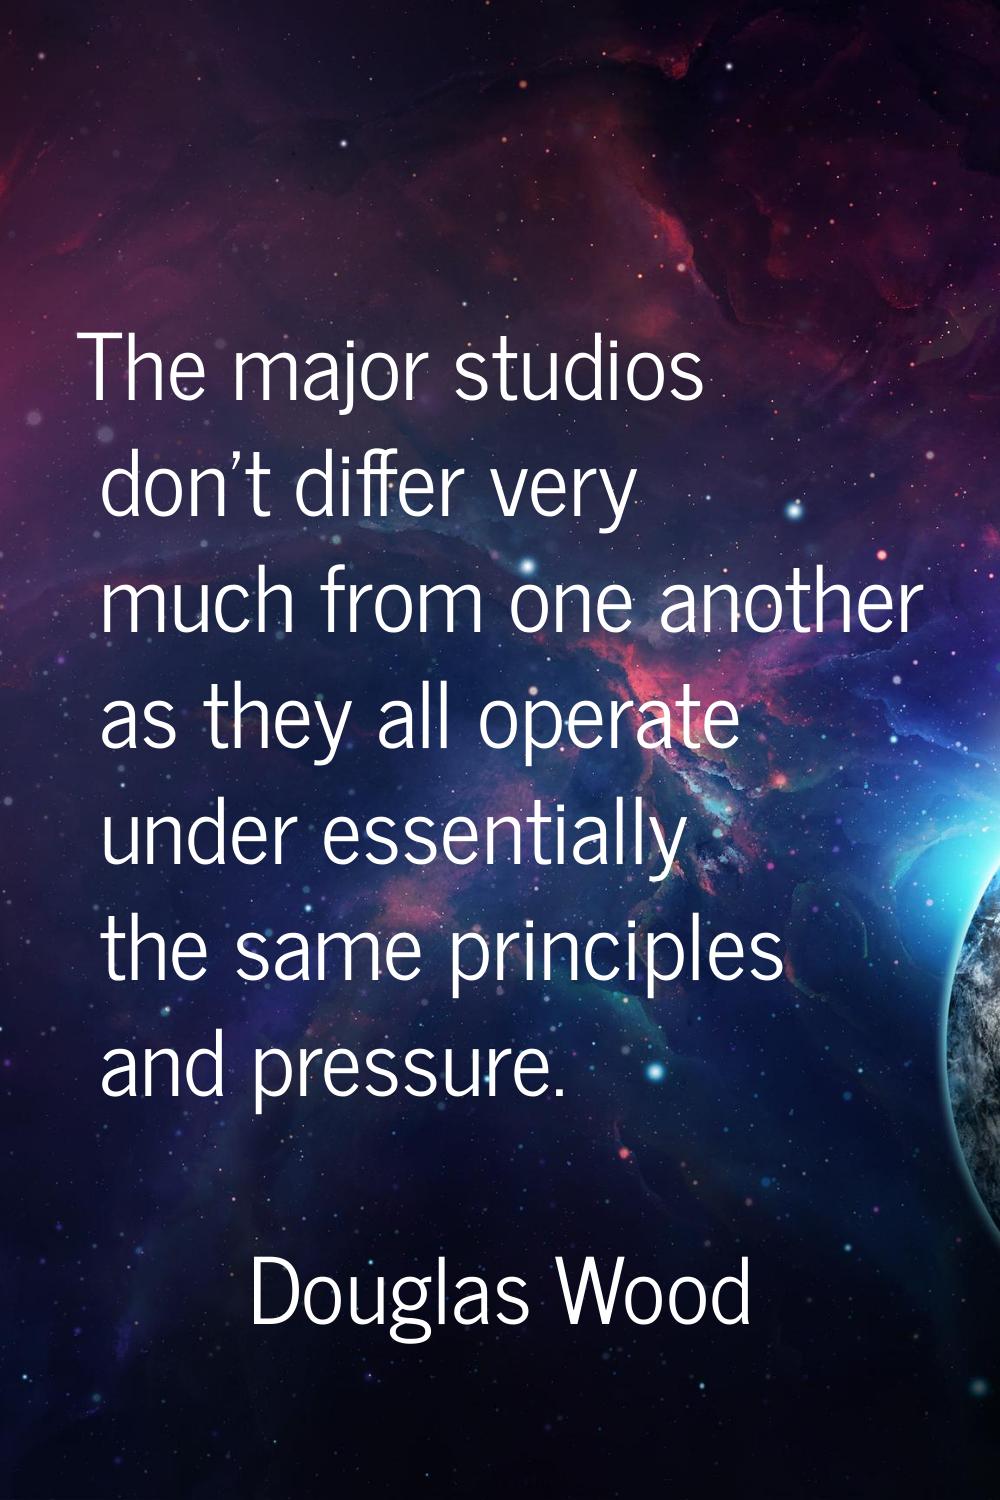 The major studios don't differ very much from one another as they all operate under essentially the